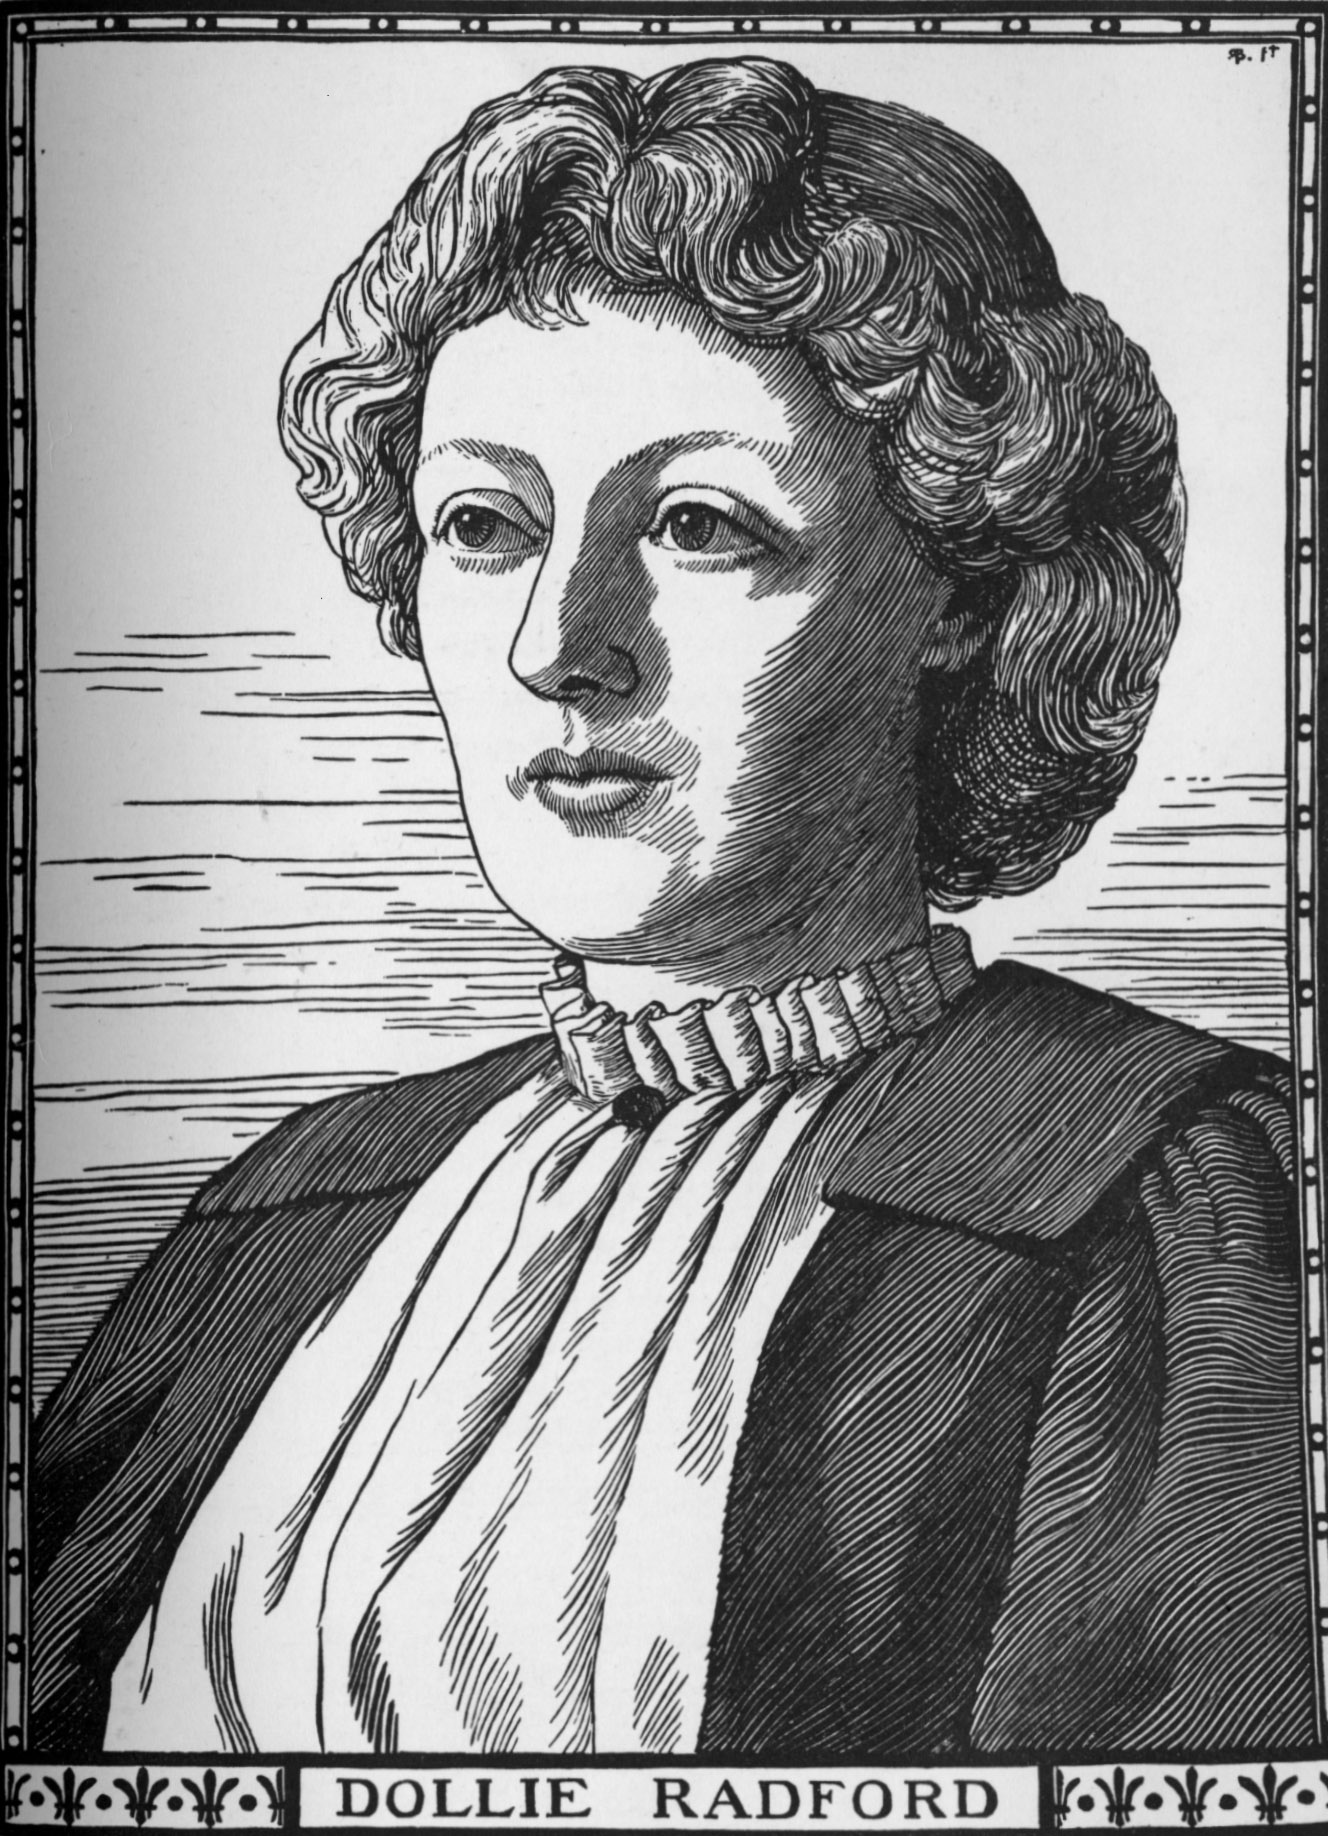 Image is a woodcut of Dollie Radford. She is shown from the chest up with ¾ face. She has short, curly hair. Her gaze is off to the left. She is wearing a light-coloured shirt with a ruffled collar and a dark jacket. The image is vertically displayed.